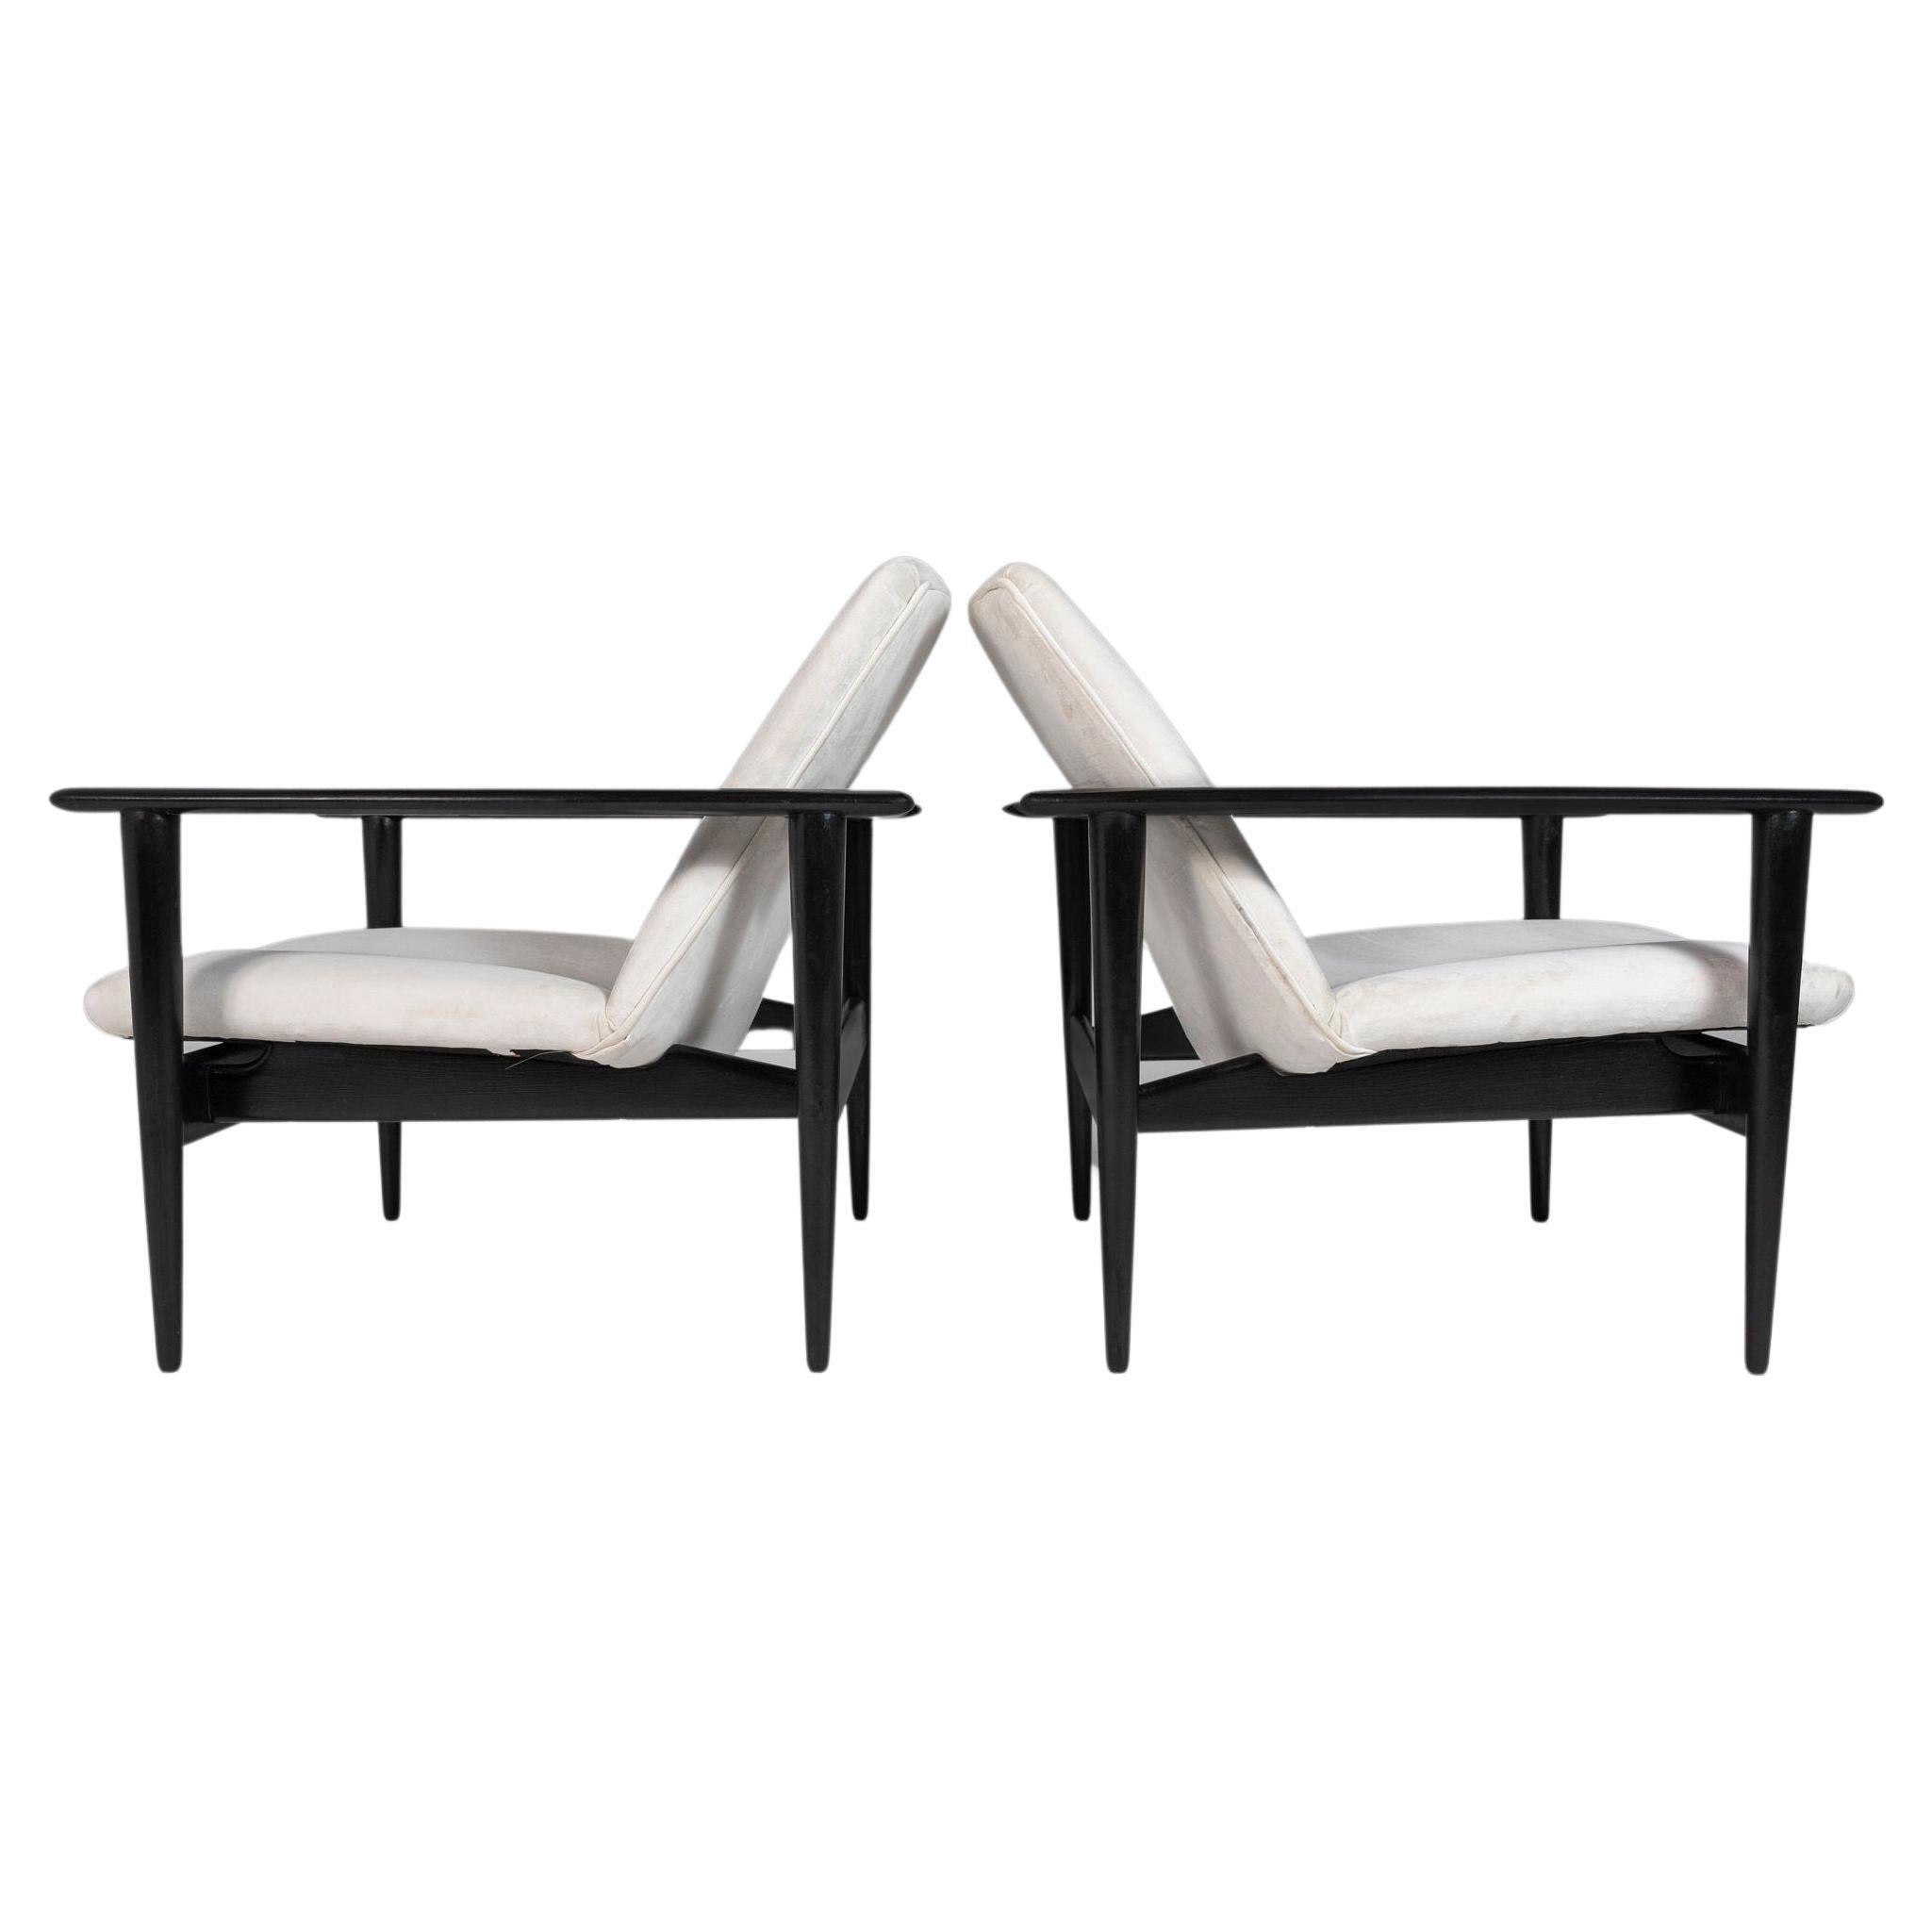 Set of Two '2' Ebonized Danish Modern Lounge Chairs Attributed to Hans Wegner For Sale